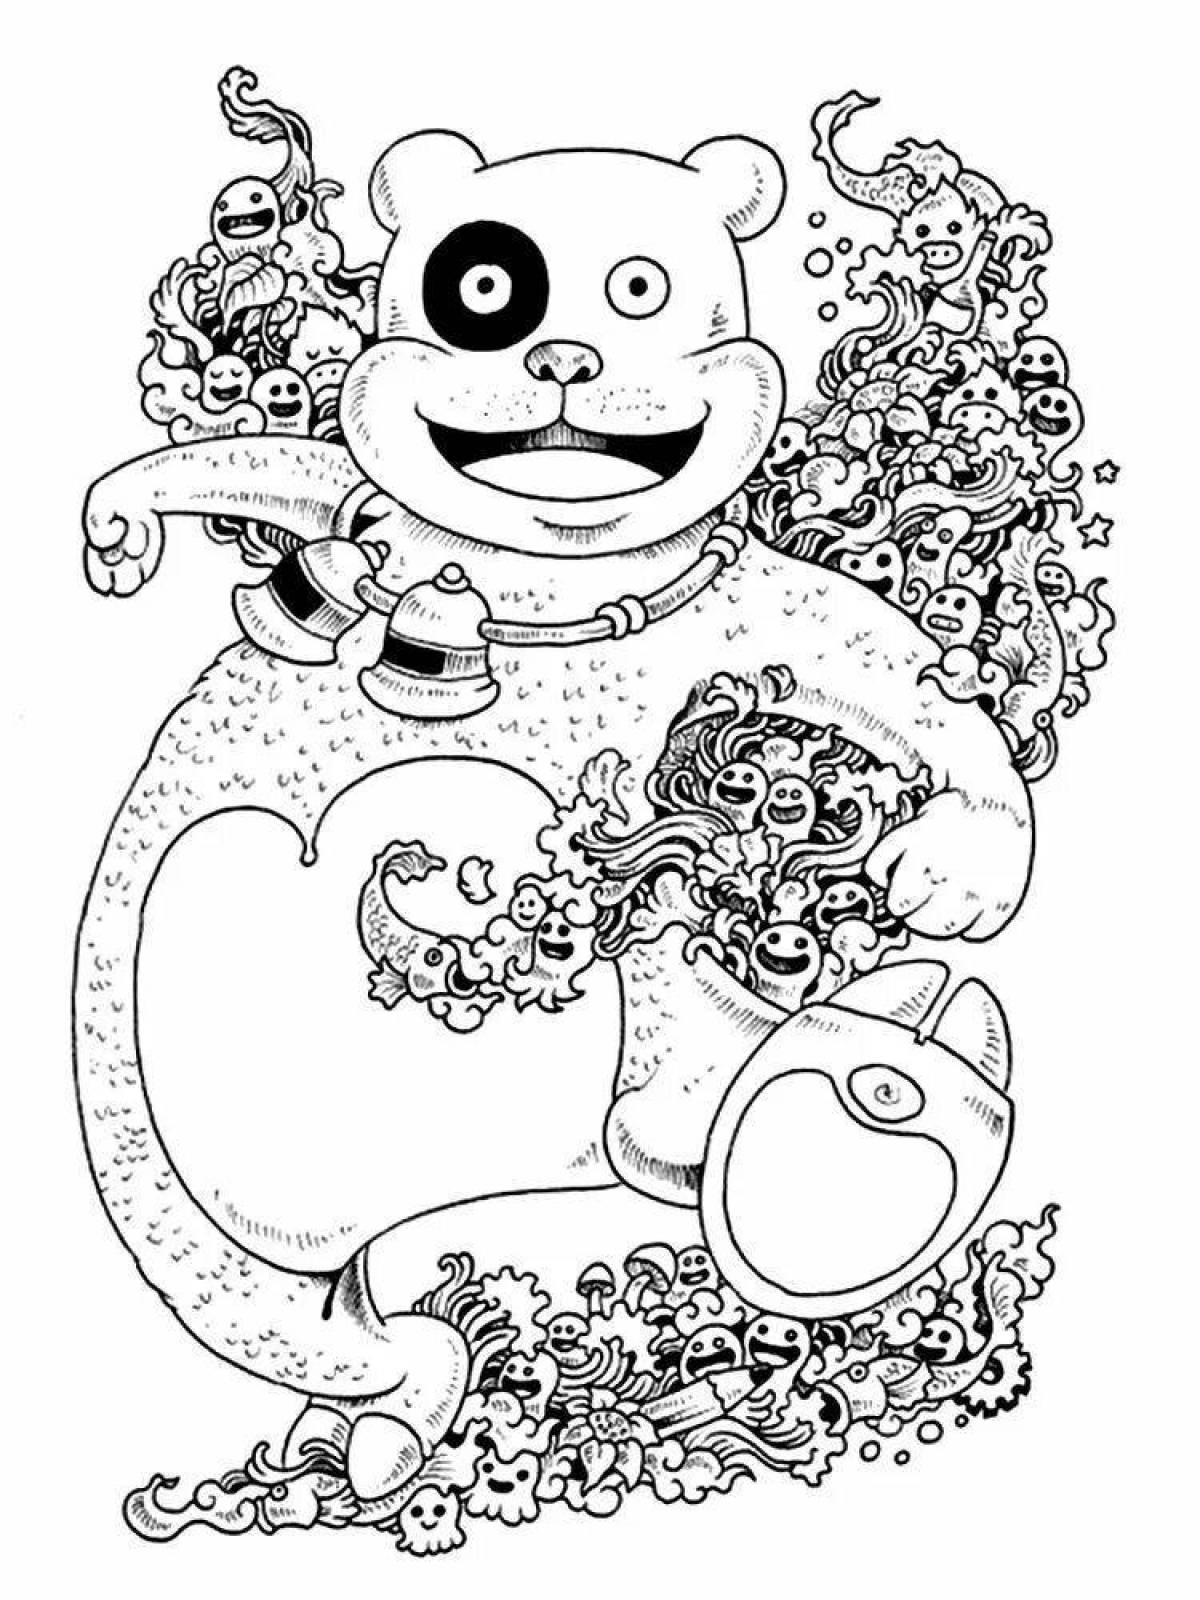 Adorable doodle invasion coloring page